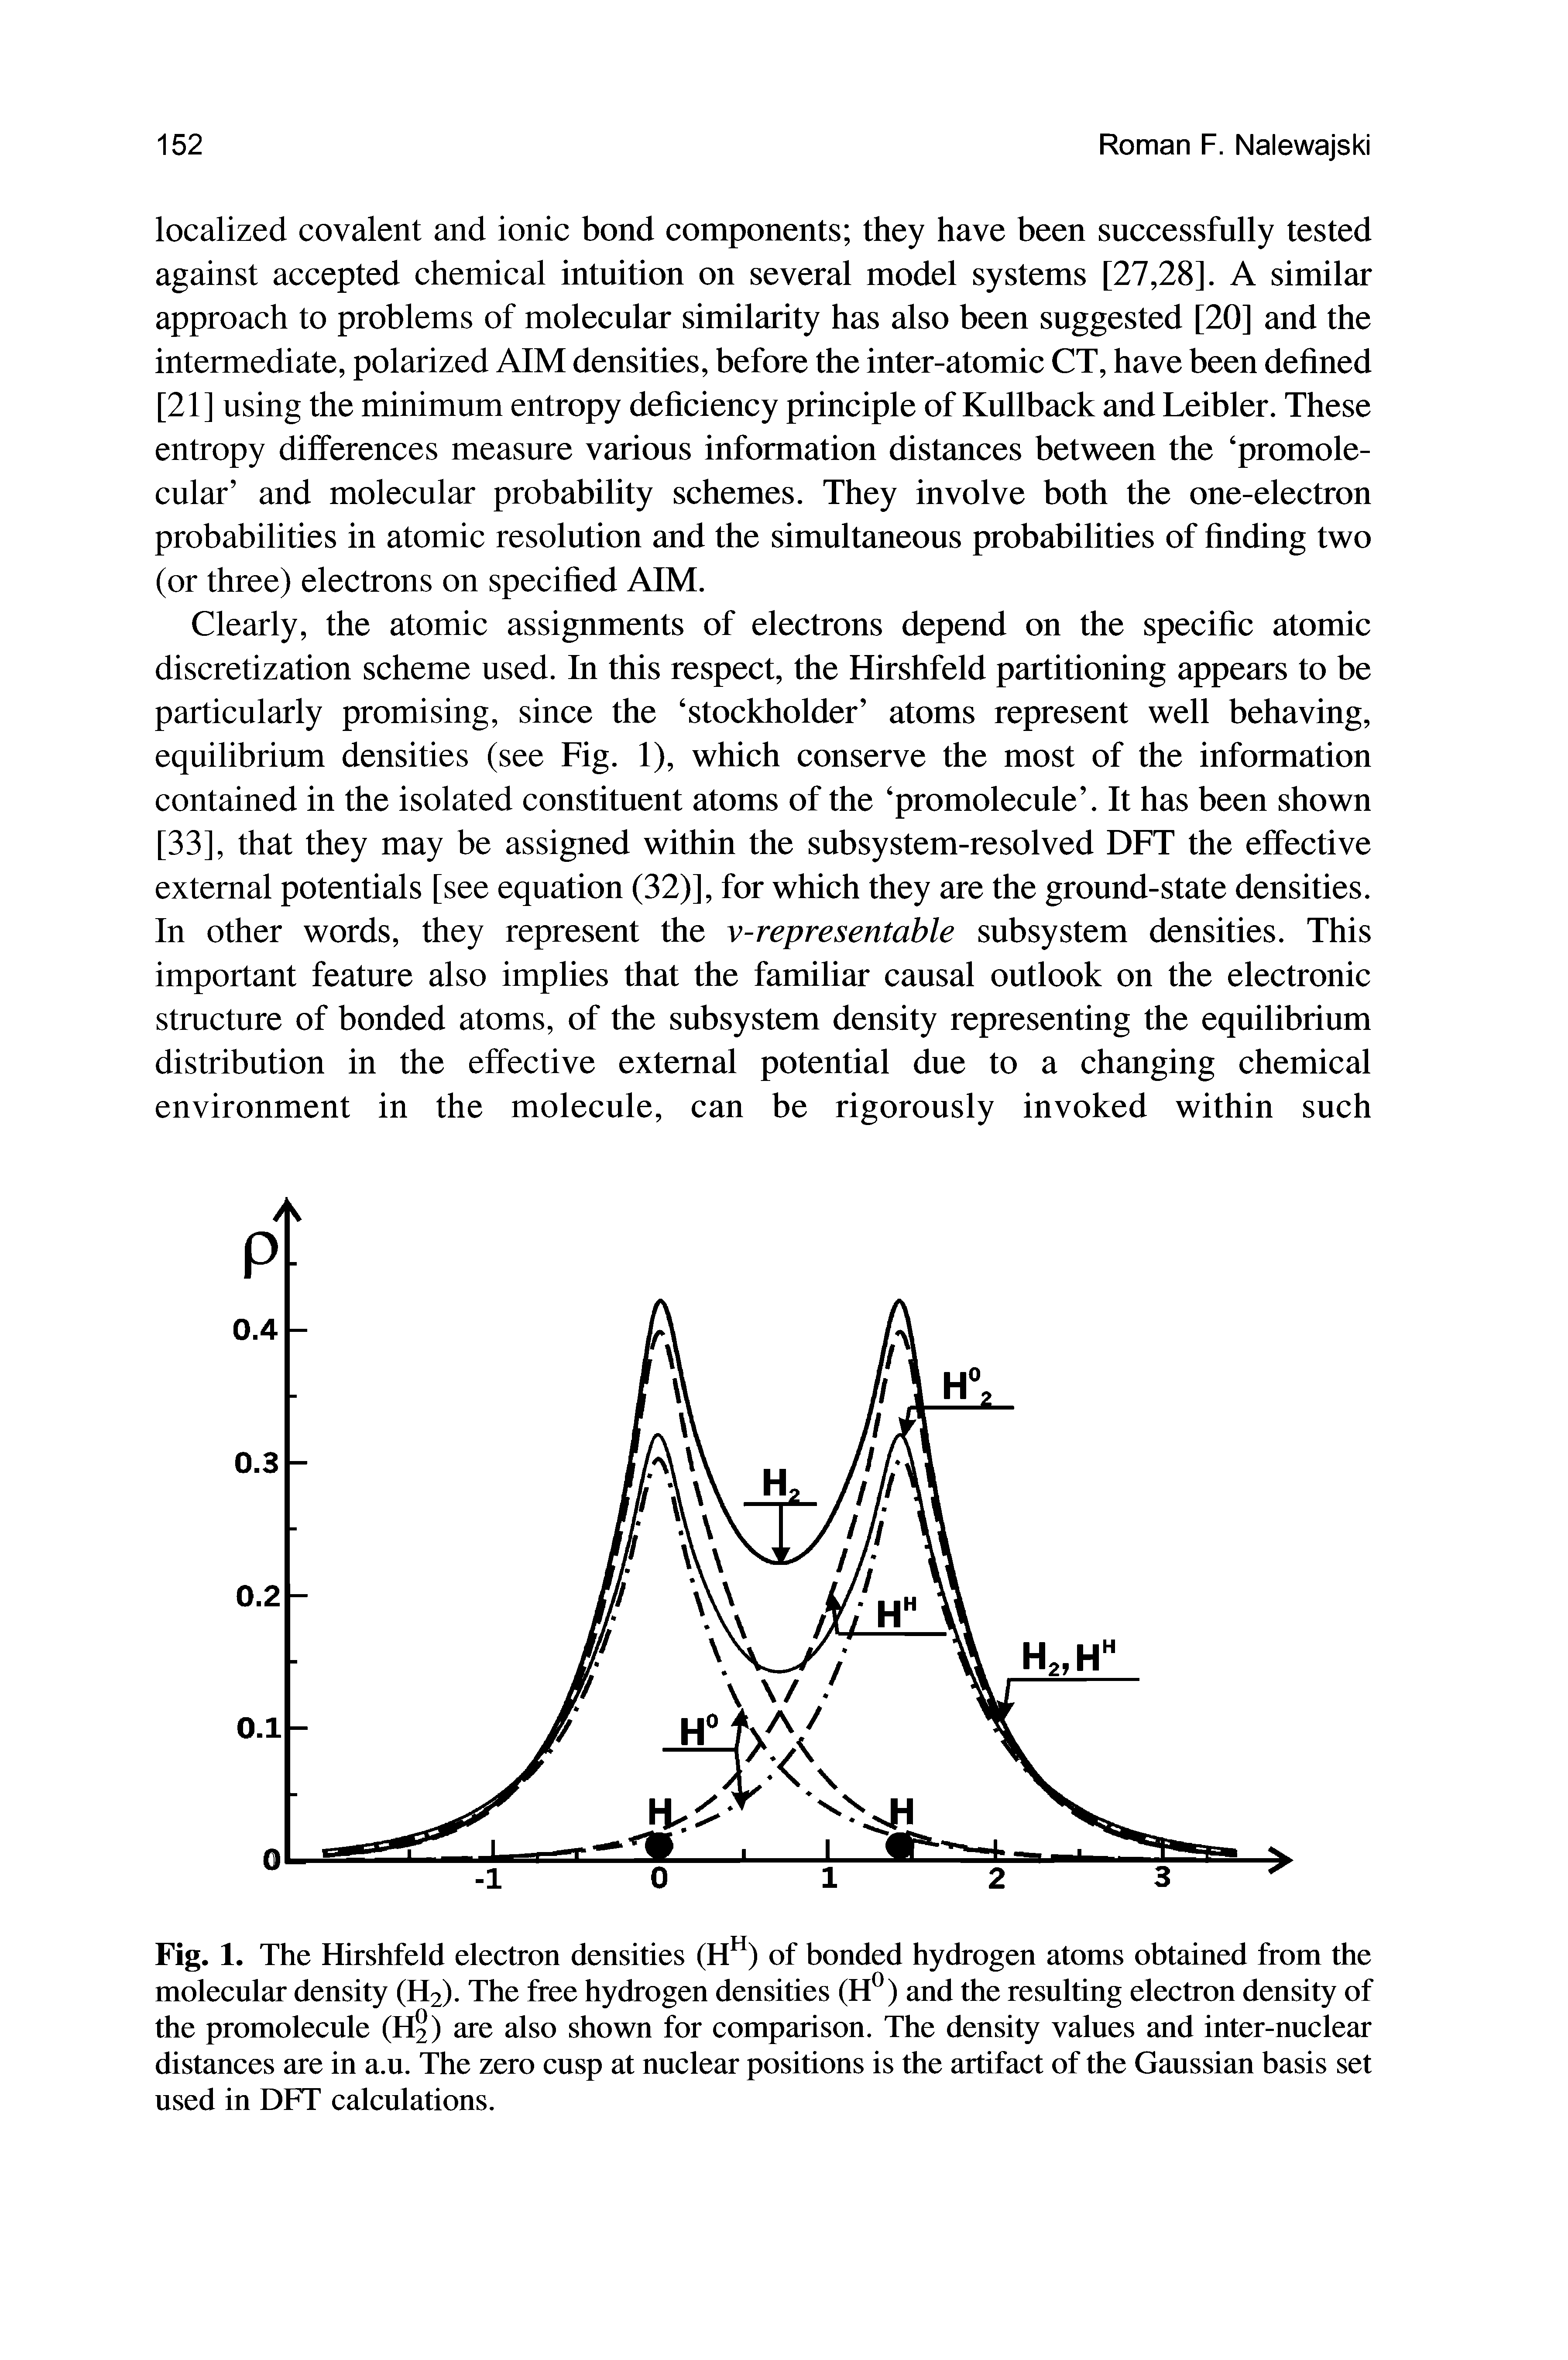 Fig. 1. The Hirshfeld electron densities (Hh) of bonded hydrogen atoms obtained from the molecular density (H2). The free hydrogen densities (H°) and the resulting electron density of the promolecule (H2) are also shown for comparison. The density values and inter-nuclear distances are in a.u. The zero cusp at nuclear positions is the artifact of the Gaussian basis set used in DFT calculations.